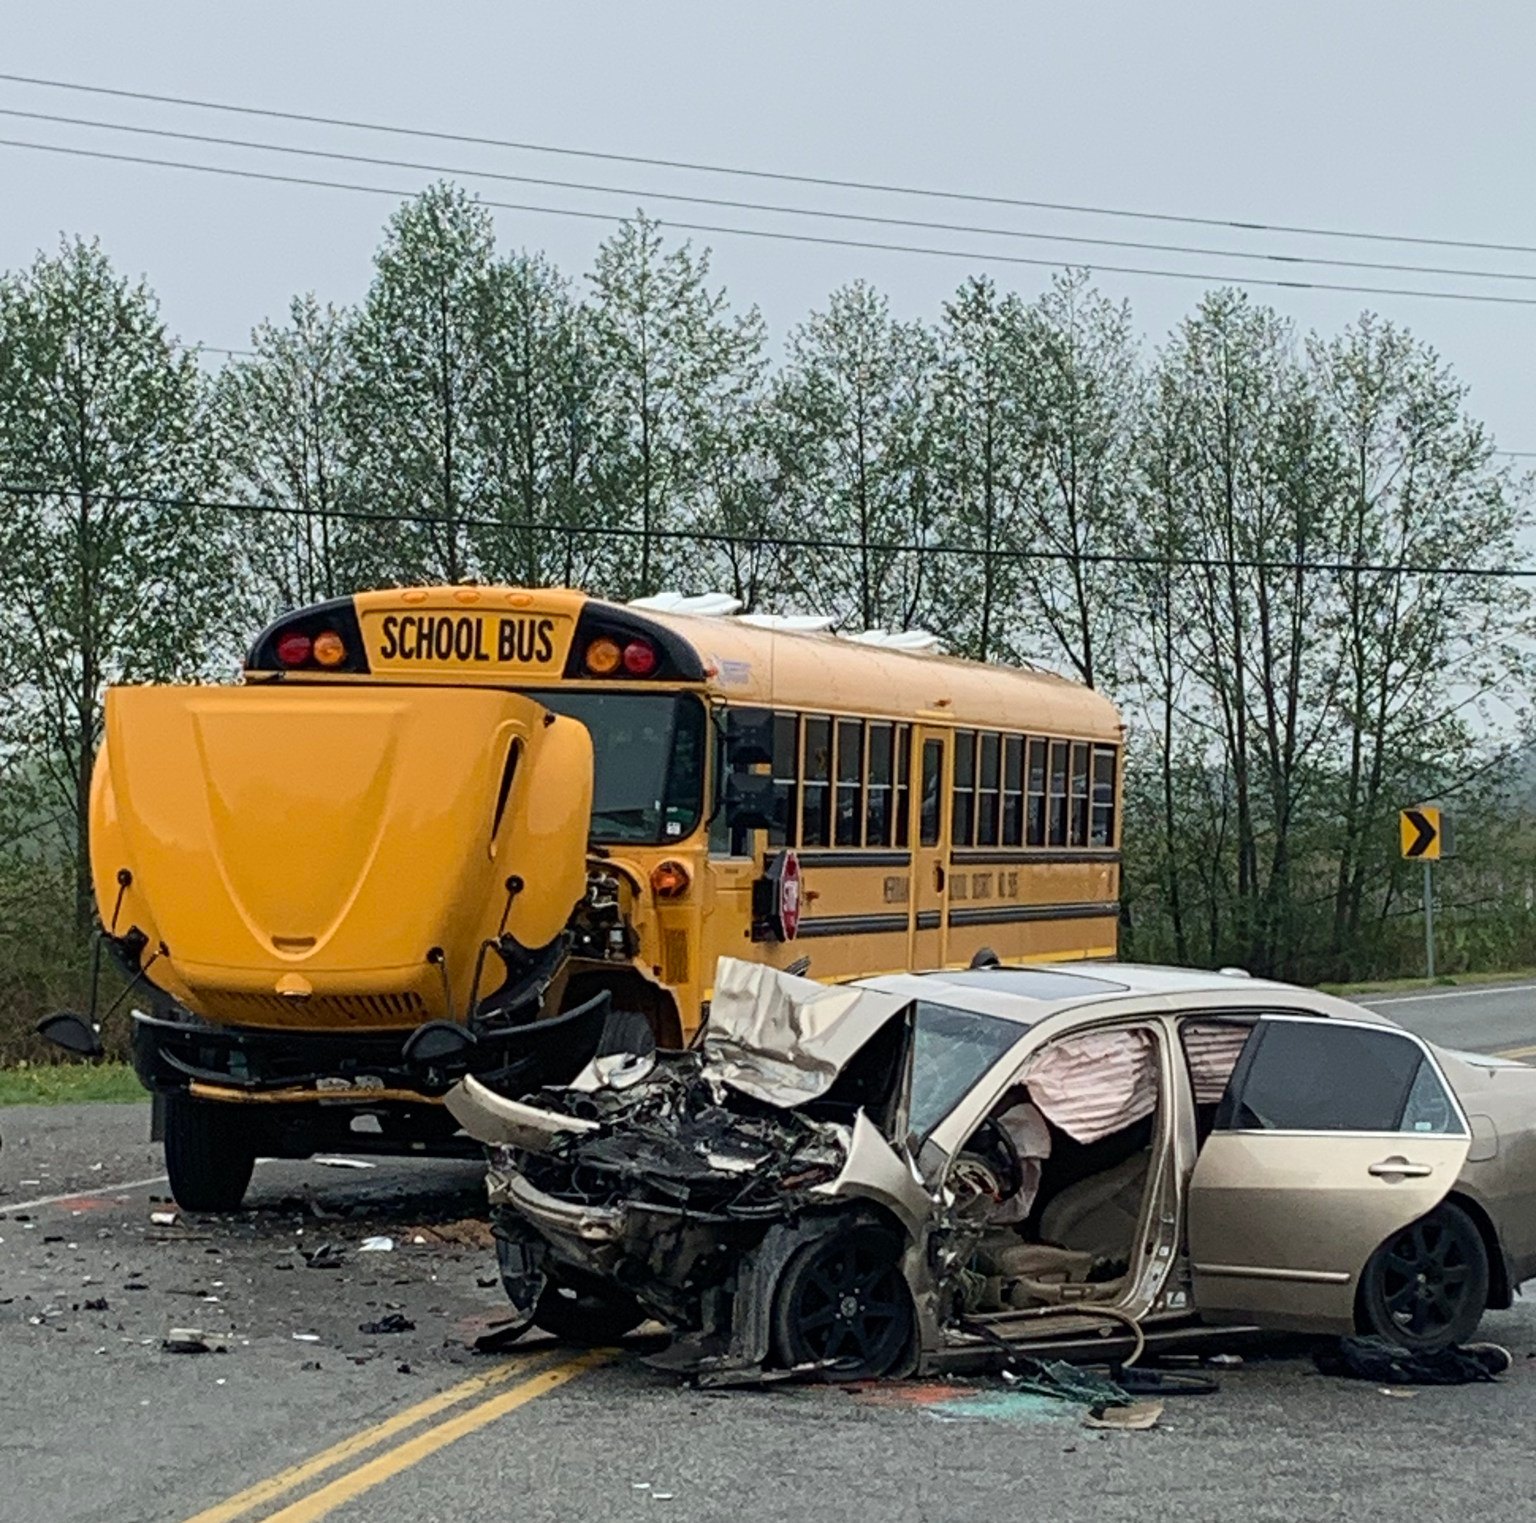 A school bus and a car collided on the morning of May 2 at the 500 block of West Pole Road in Lynden. Four people were injured